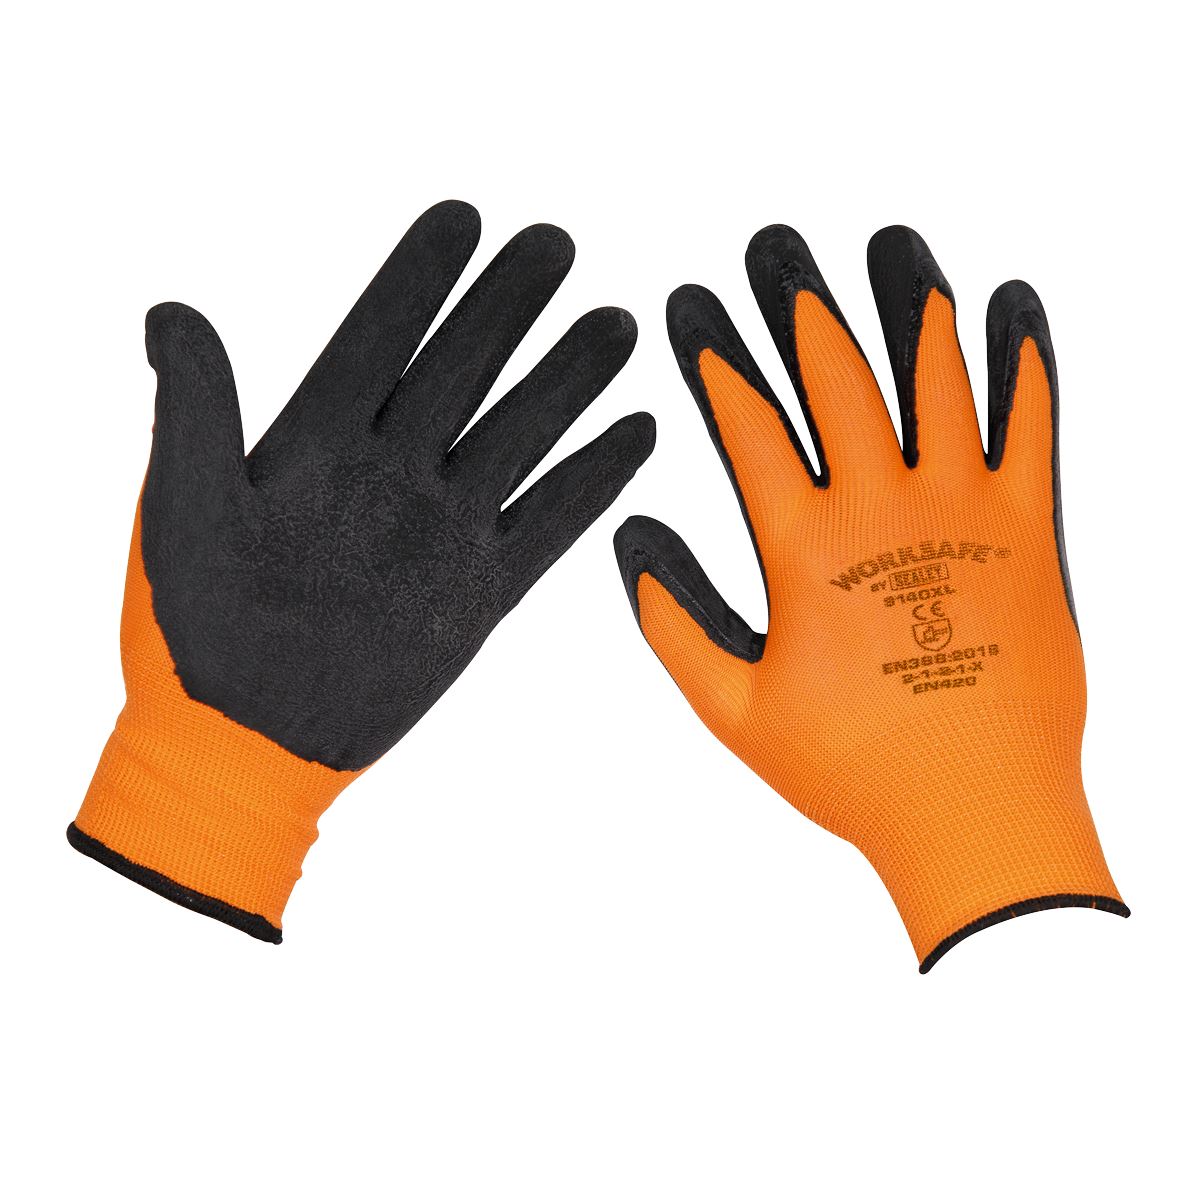 Worksafe by Sealey Foam Latex Gloves (X-Large) - Pair